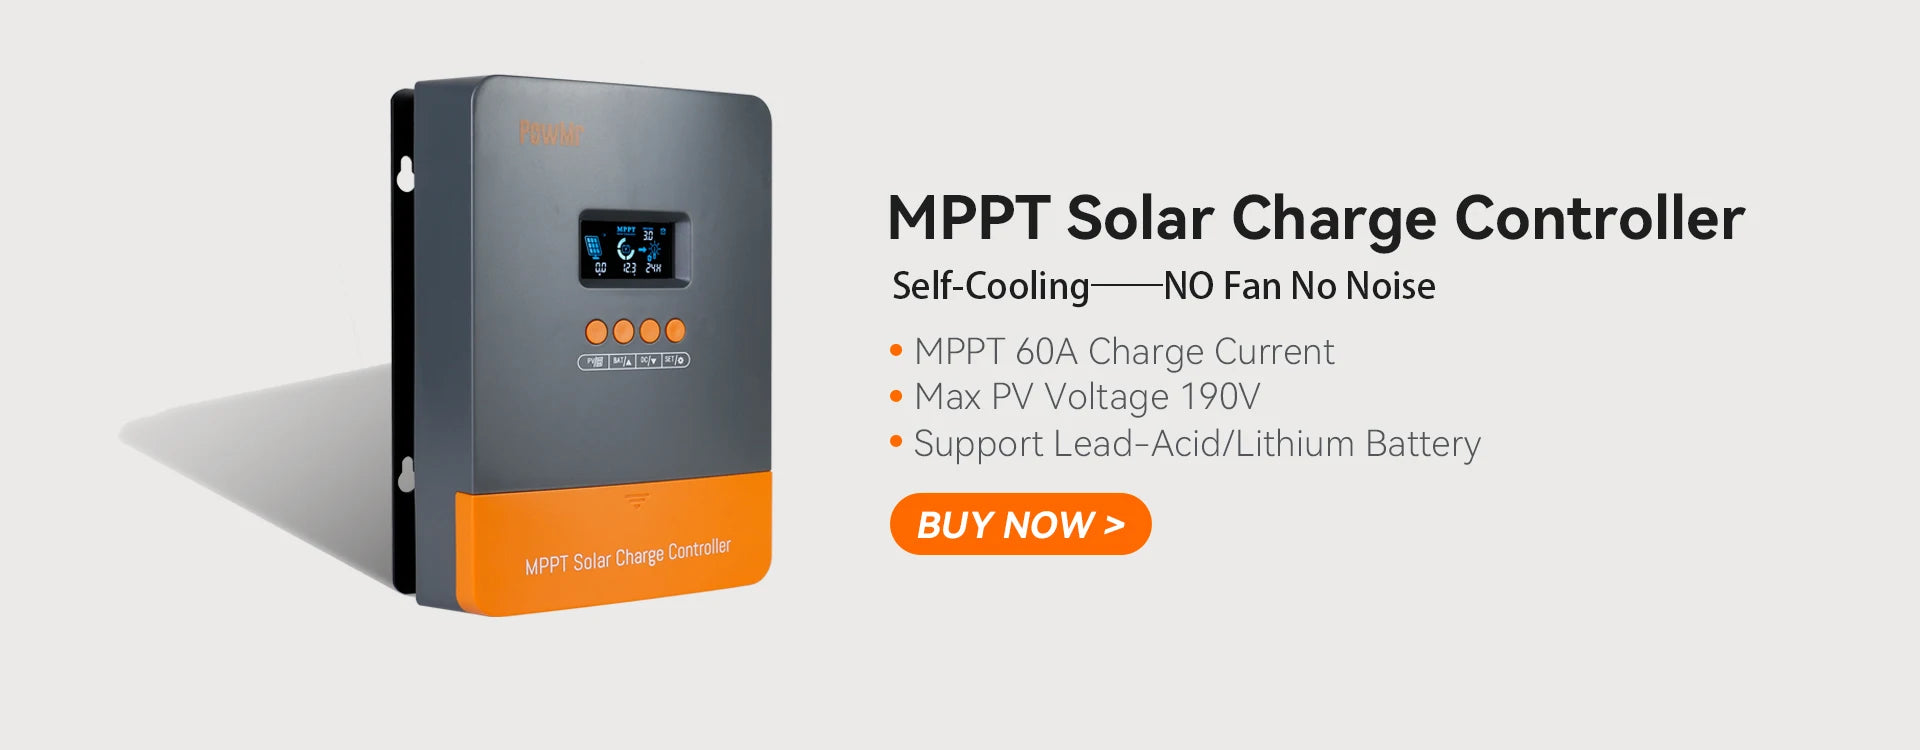 40A 50A 60A Solar Panel Charge Controller, Solar charge controller with self-cooling tech for quiet use, suitable for 60A charging and 190V panels.